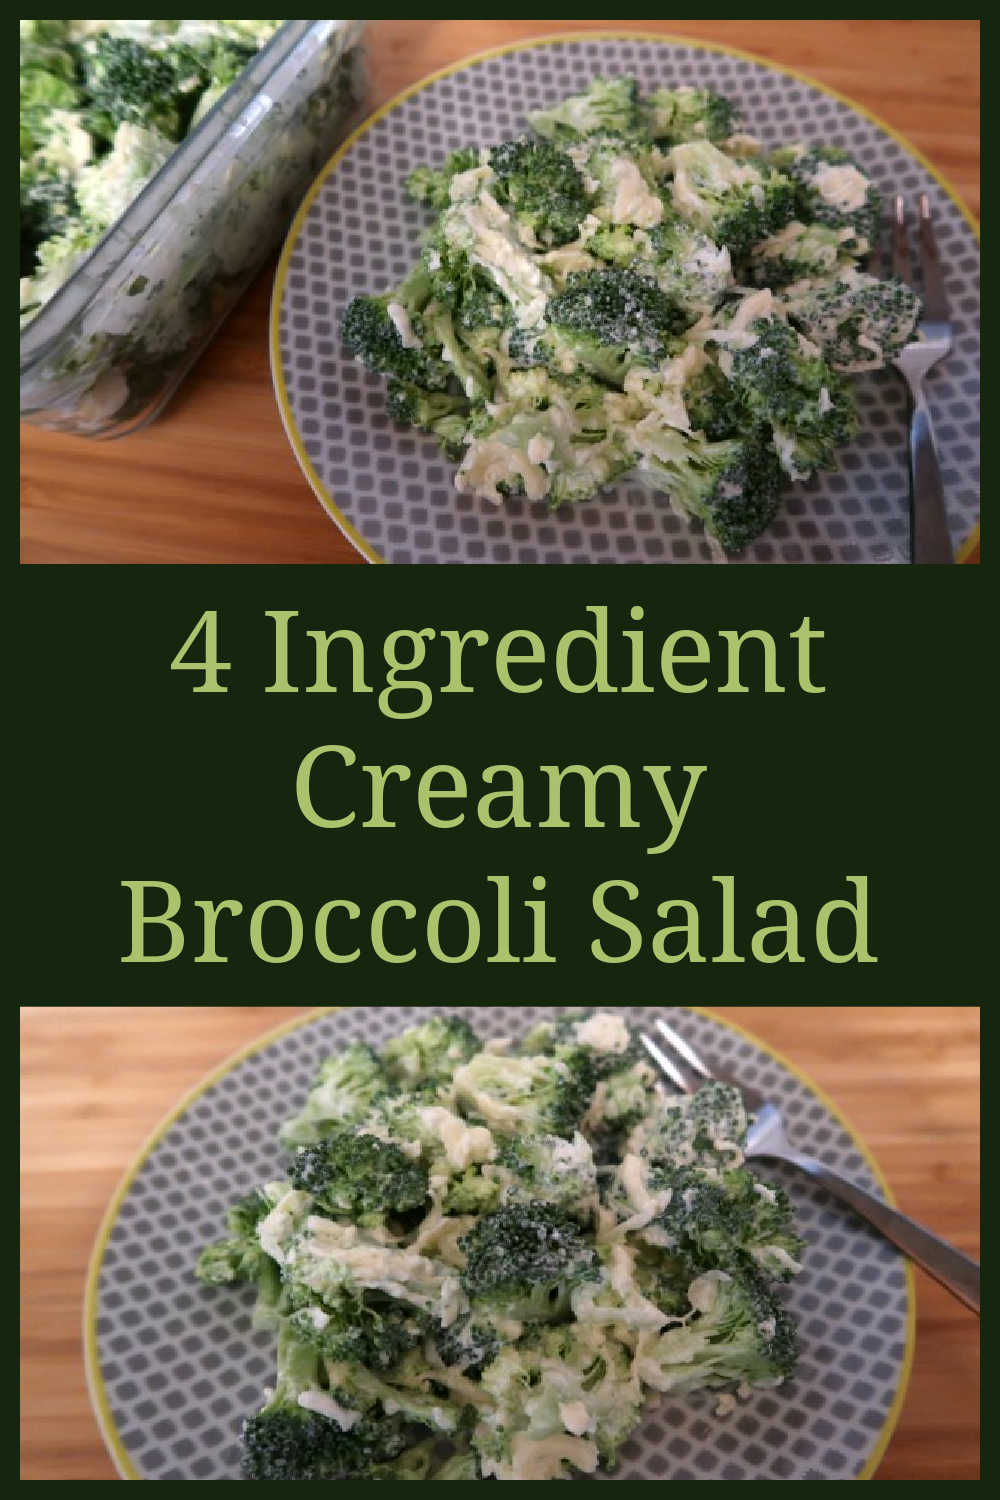 Creamy Broccoli Salad Recipe - How to make the best ever easy broccoli salad with only 4 ingredients including lemon, sour cream and cheese